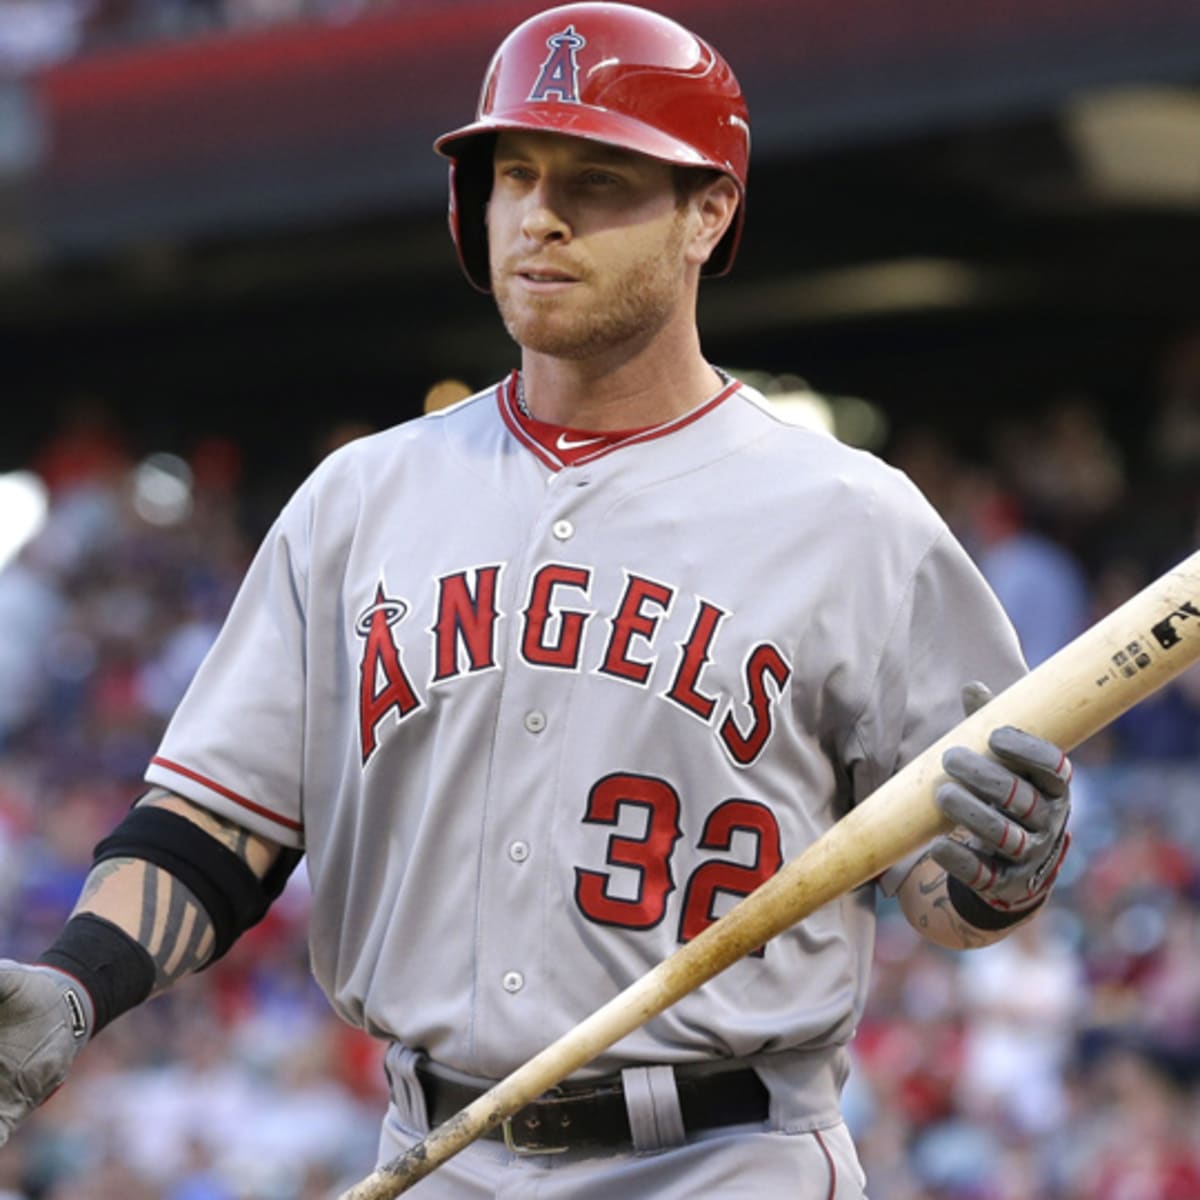 Ex-Reds outfielder Josh Hamilton indicted, accused of beating 14